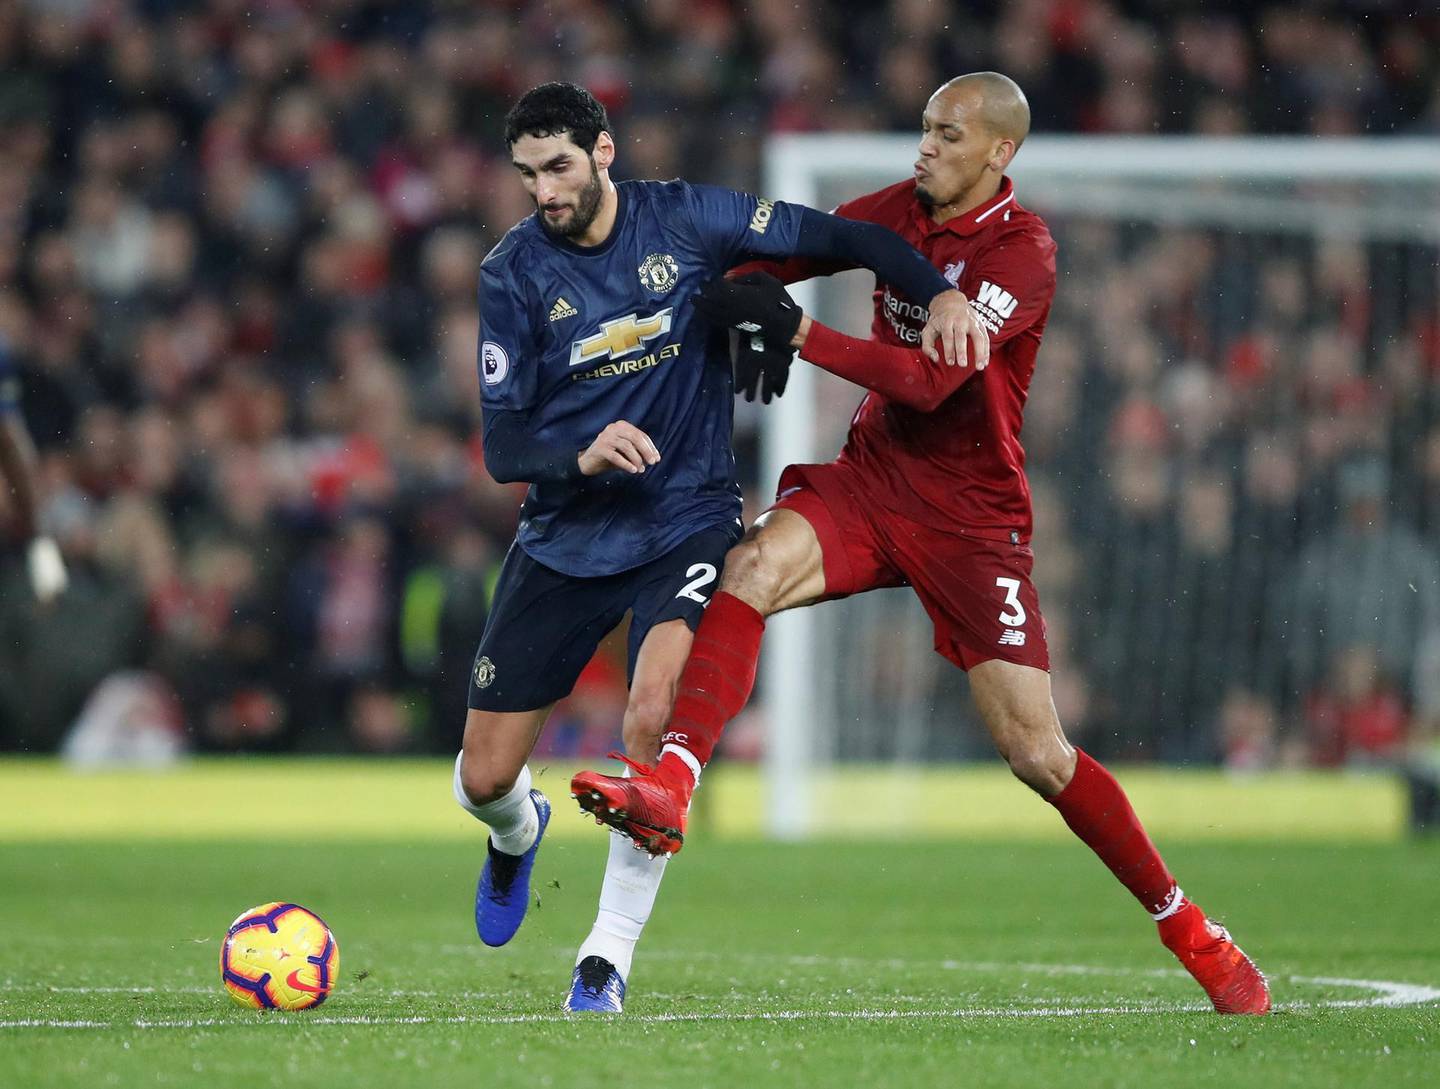 Soccer Football - Premier League - Liverpool v Manchester United - Anfield, Liverpool, Britain - December 16, 2018  Manchester United's Marouane Fellaini in action with Liverpool's Fabinho   Action Images via Reuters/Carl Recine  EDITORIAL USE ONLY. No use with unauthorized audio, video, data, fixture lists, club/league logos or "live" services. Online in-match use limited to 75 images, no video emulation. No use in betting, games or single club/league/player publications.  Please contact your account representative for further details.